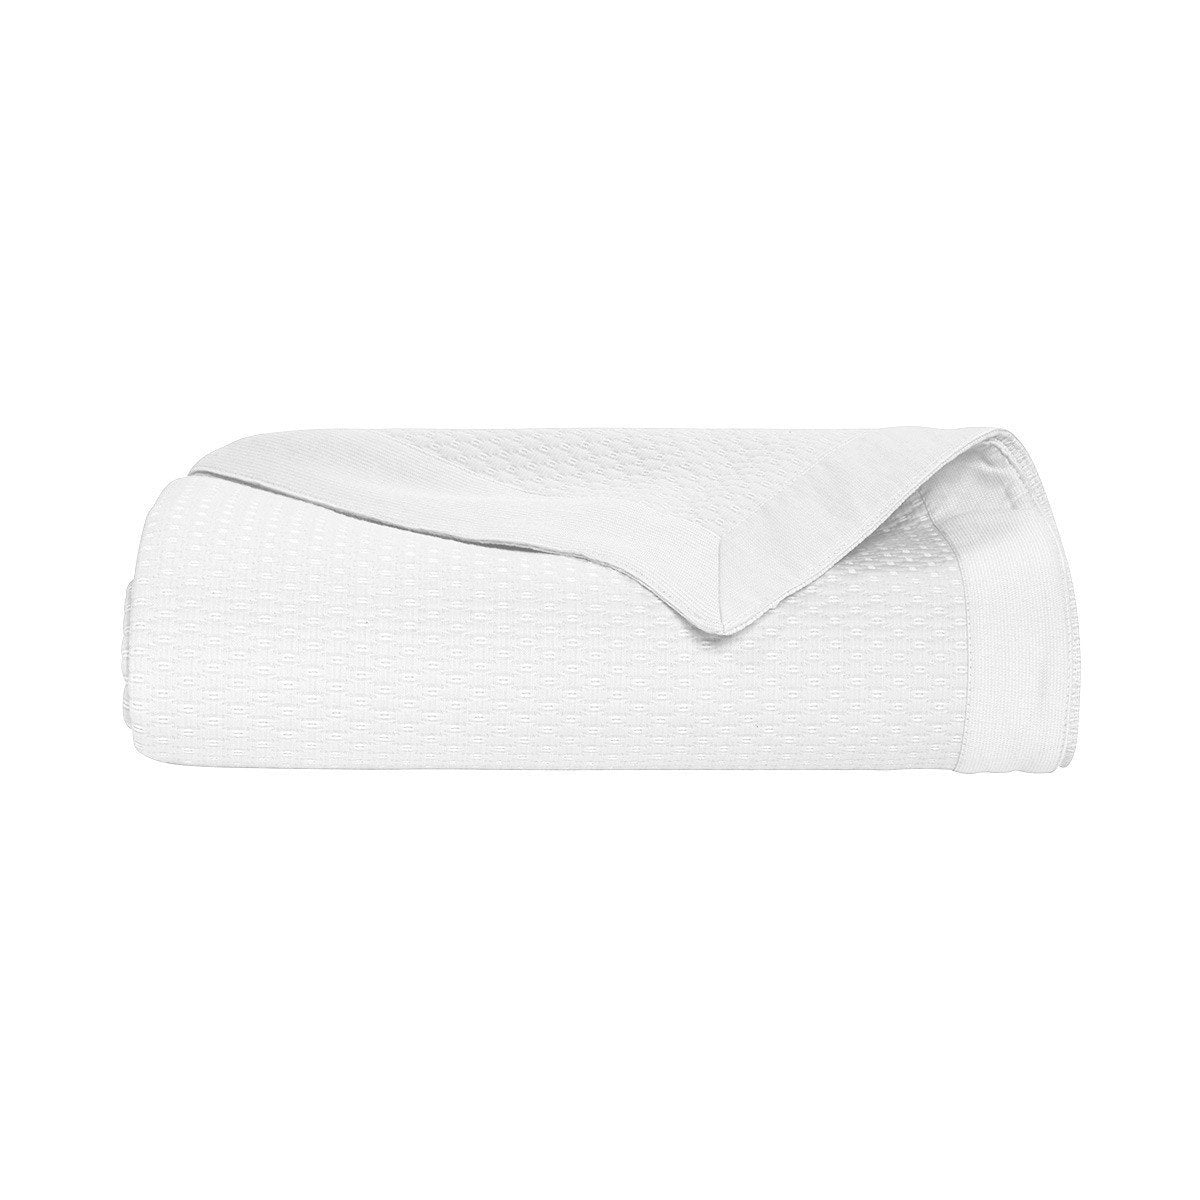 Morphée Blanc Coverlet by Yves Delorme | Fig Linens - White, cotton, king, queen coverlet